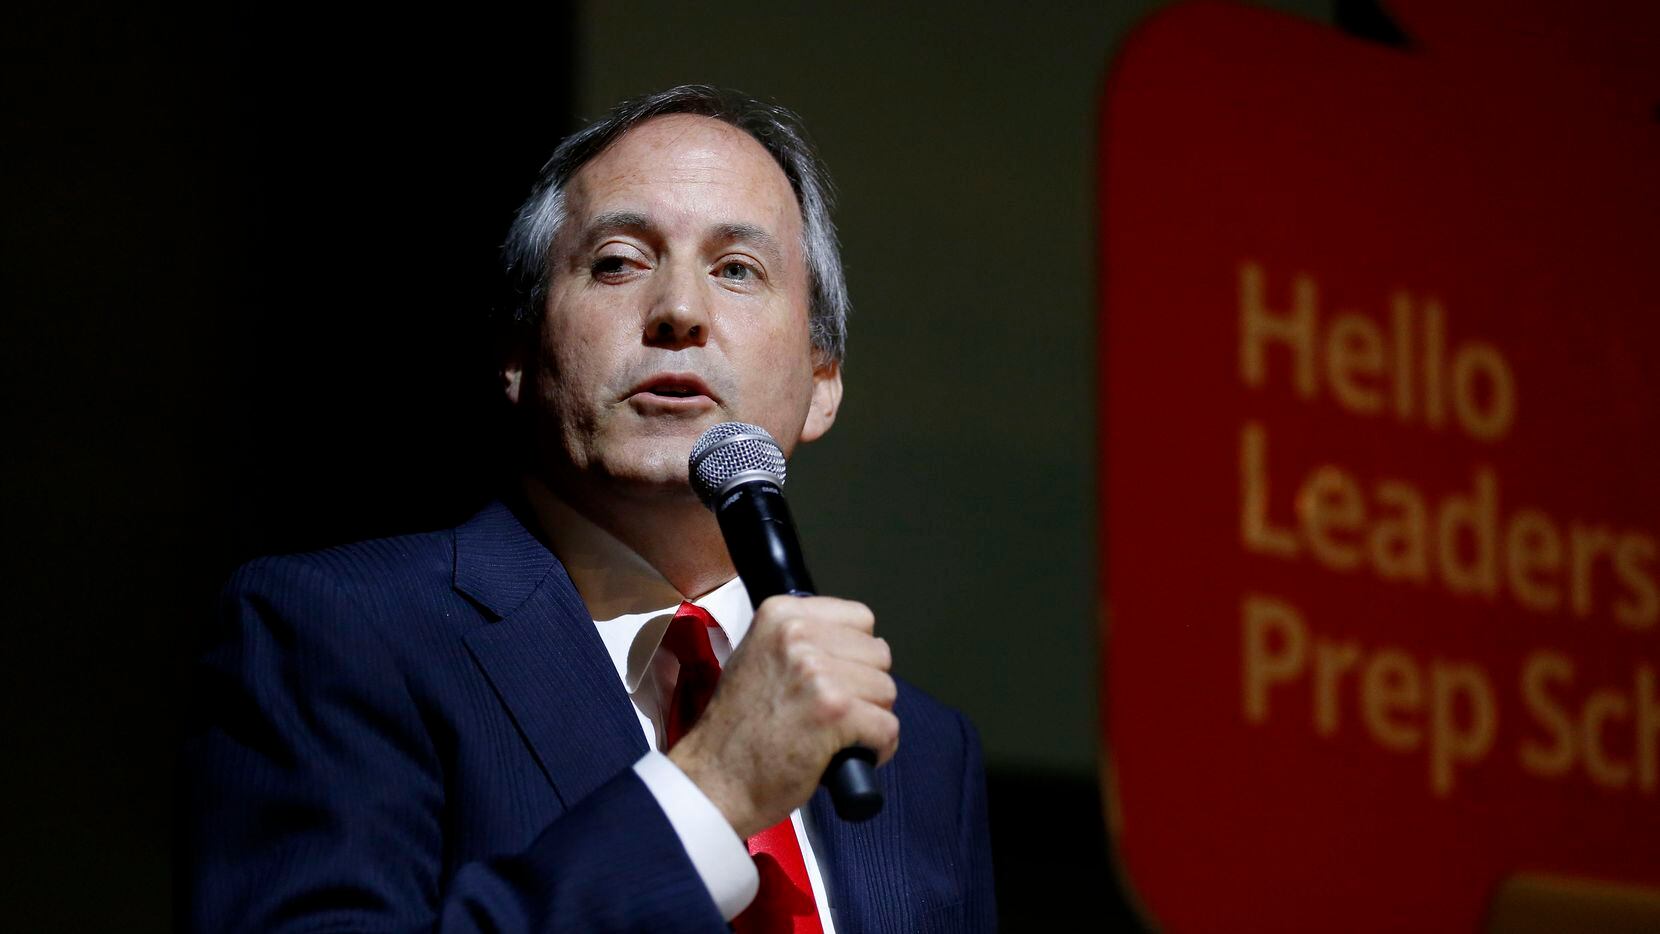 Texas Attorney General Ken Paxton speaks to students while participating during The Online Safety Roadshow at Leadership Prep School in Frisco, Texas Wednesday May 6, 2015. (Andy Jacobsohn/The Dallas Morning News)